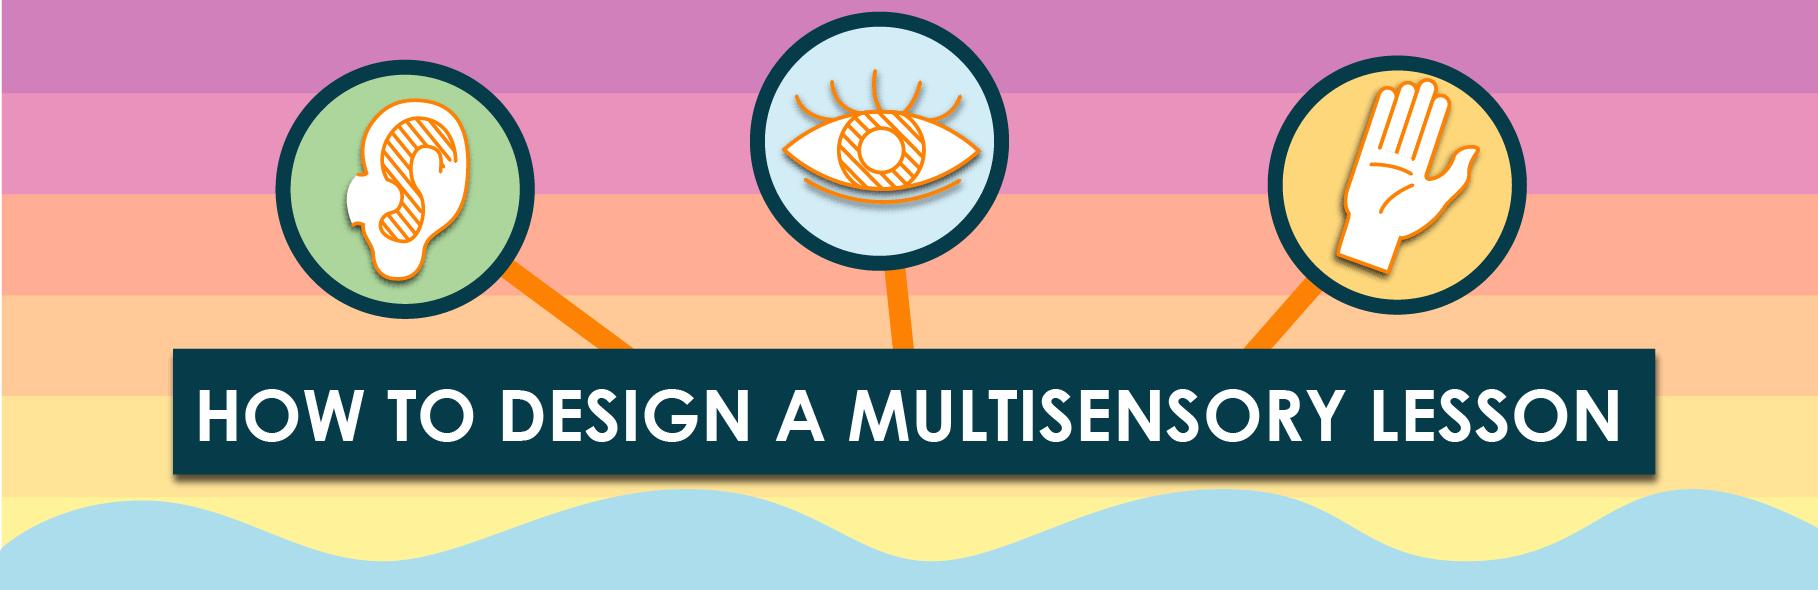 How to Design a Multisensory Lesson